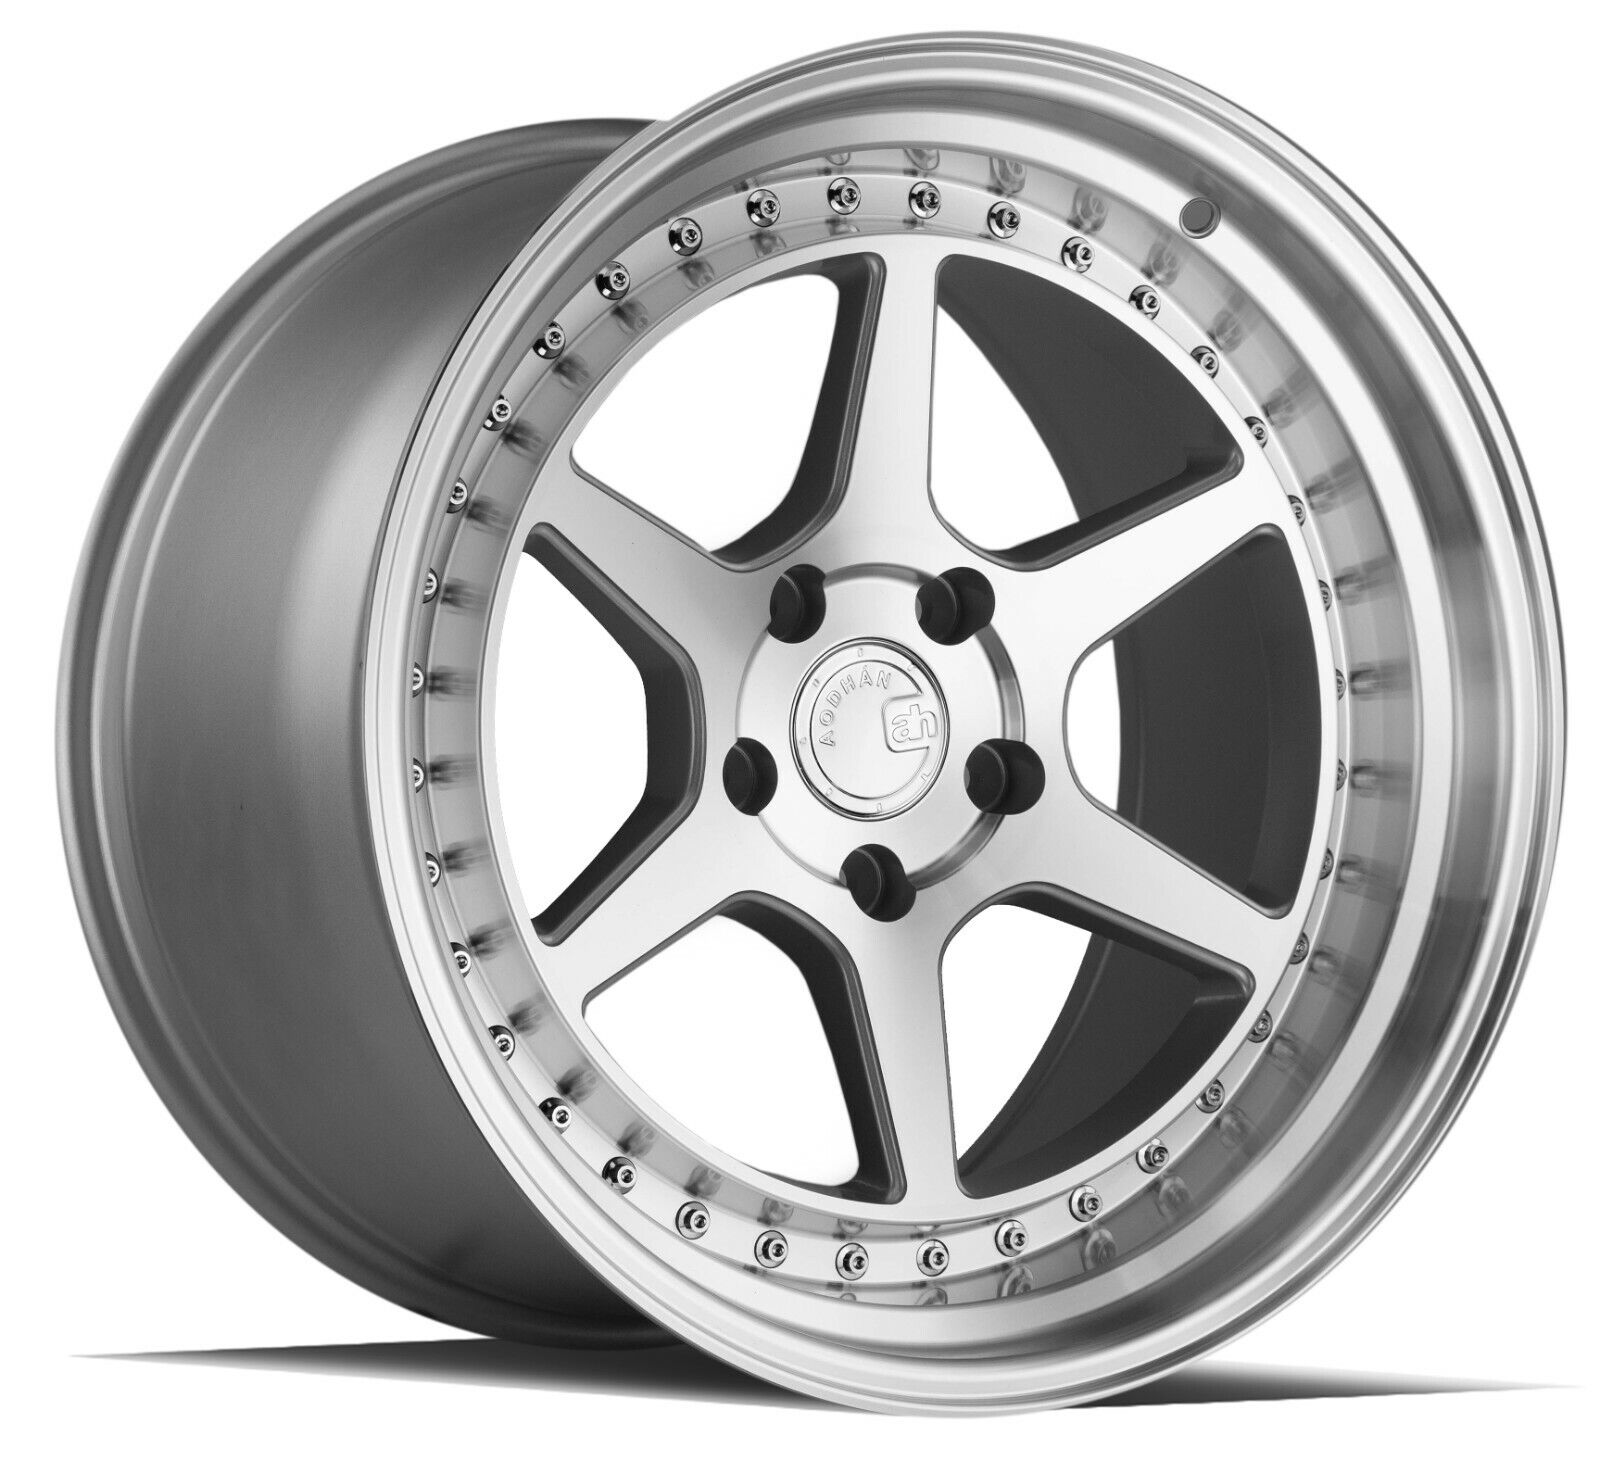 Aodhan DS09 18x9.5 +35 5x100 Silver w/ Machined Lip (Set of 4)